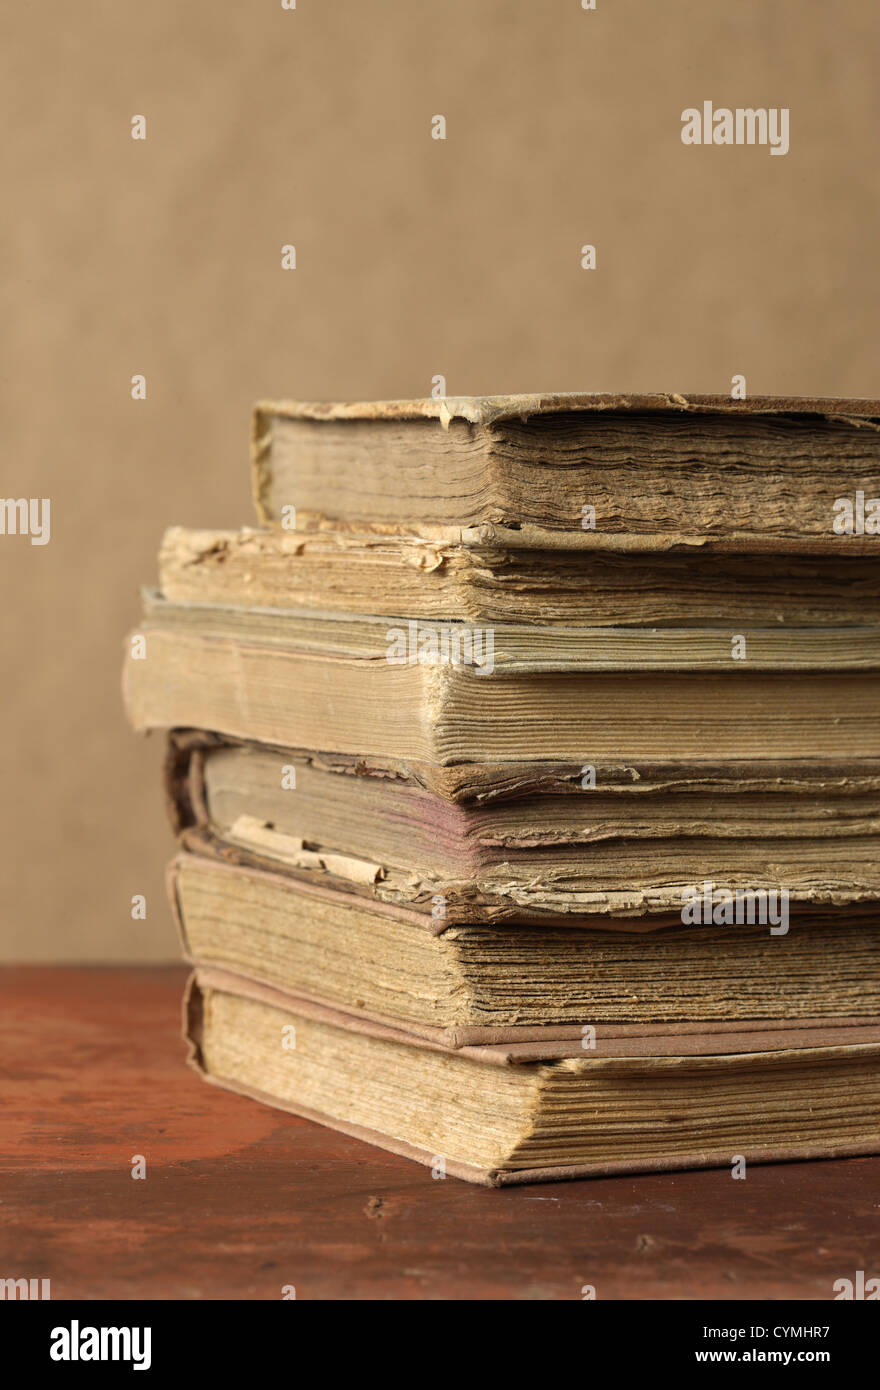 a stack of old books Stock Photo